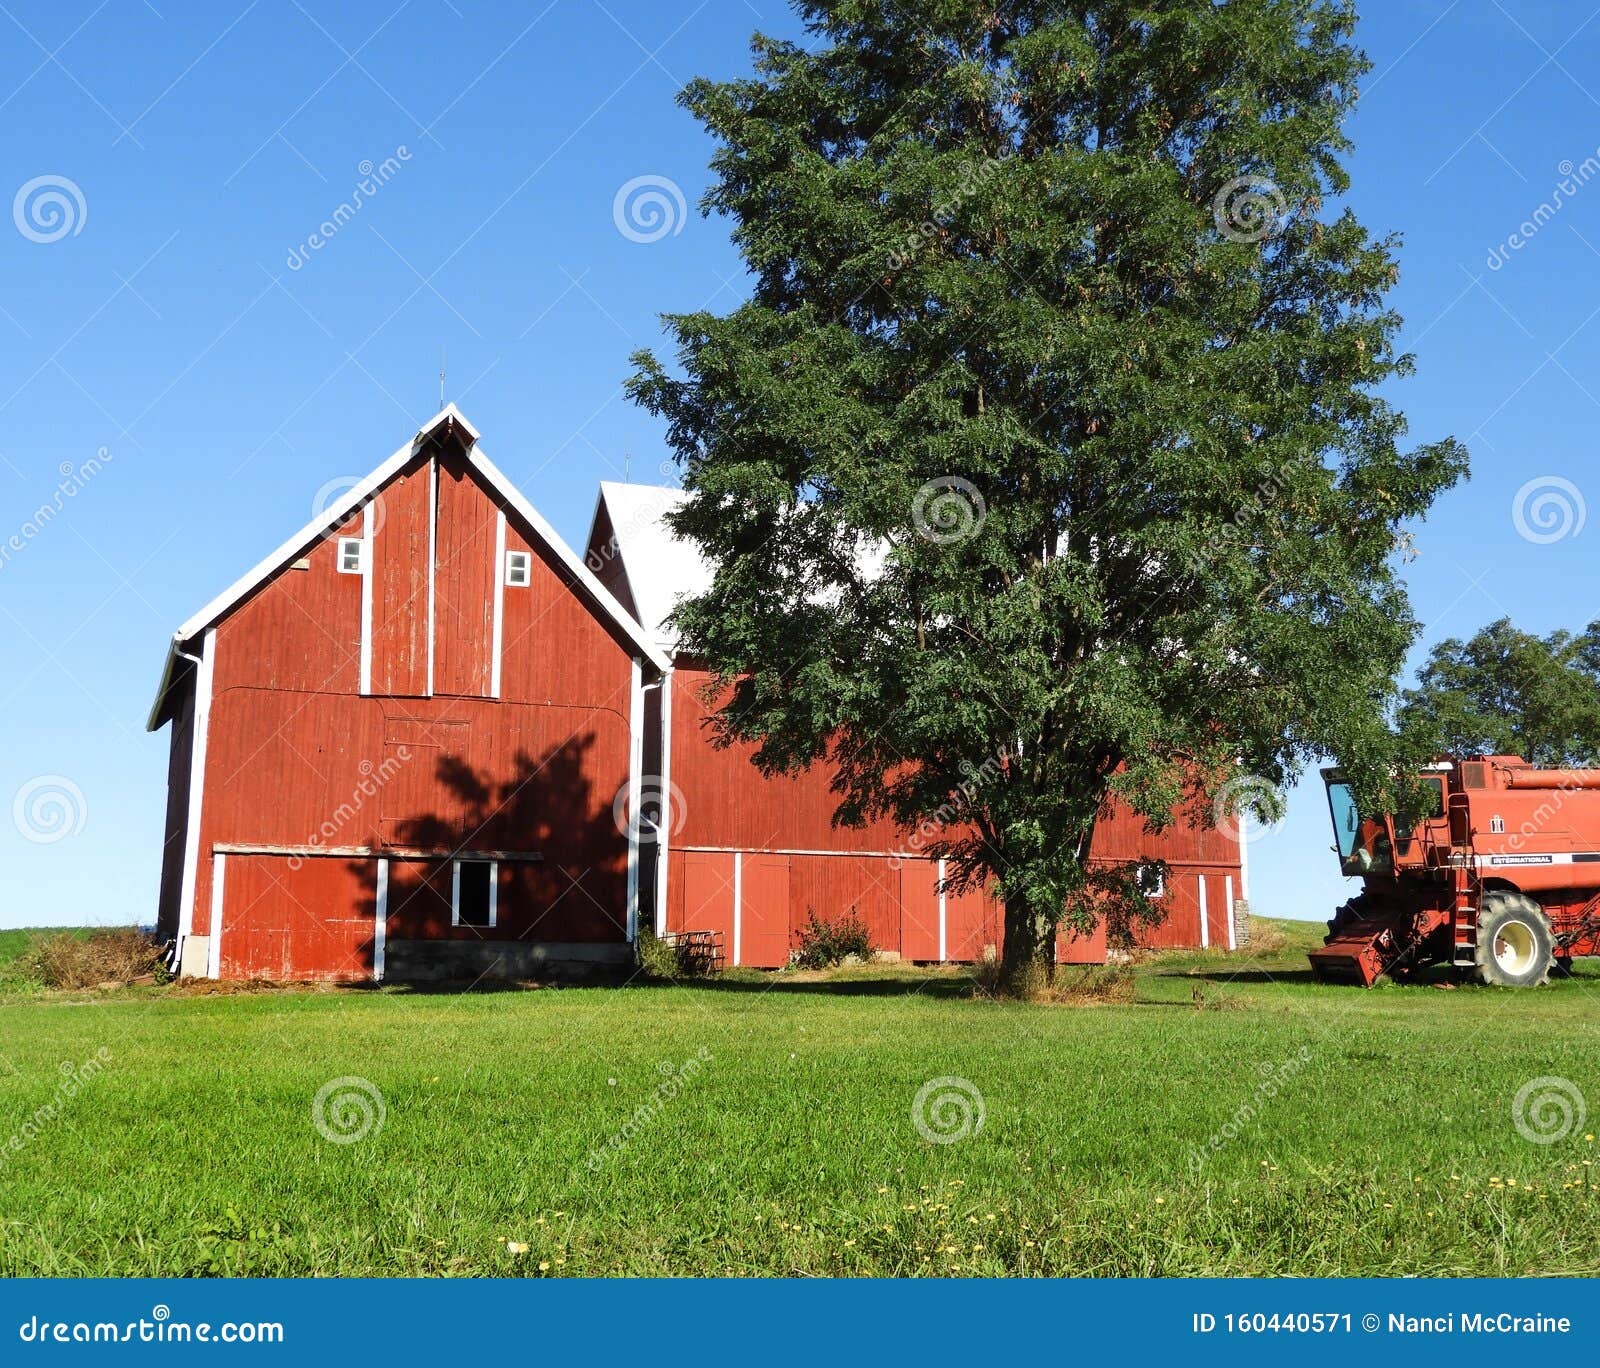 Vintage Red Barn on Blue Sky in NYS Stock Image - Image of painted,  vintage: 160440571